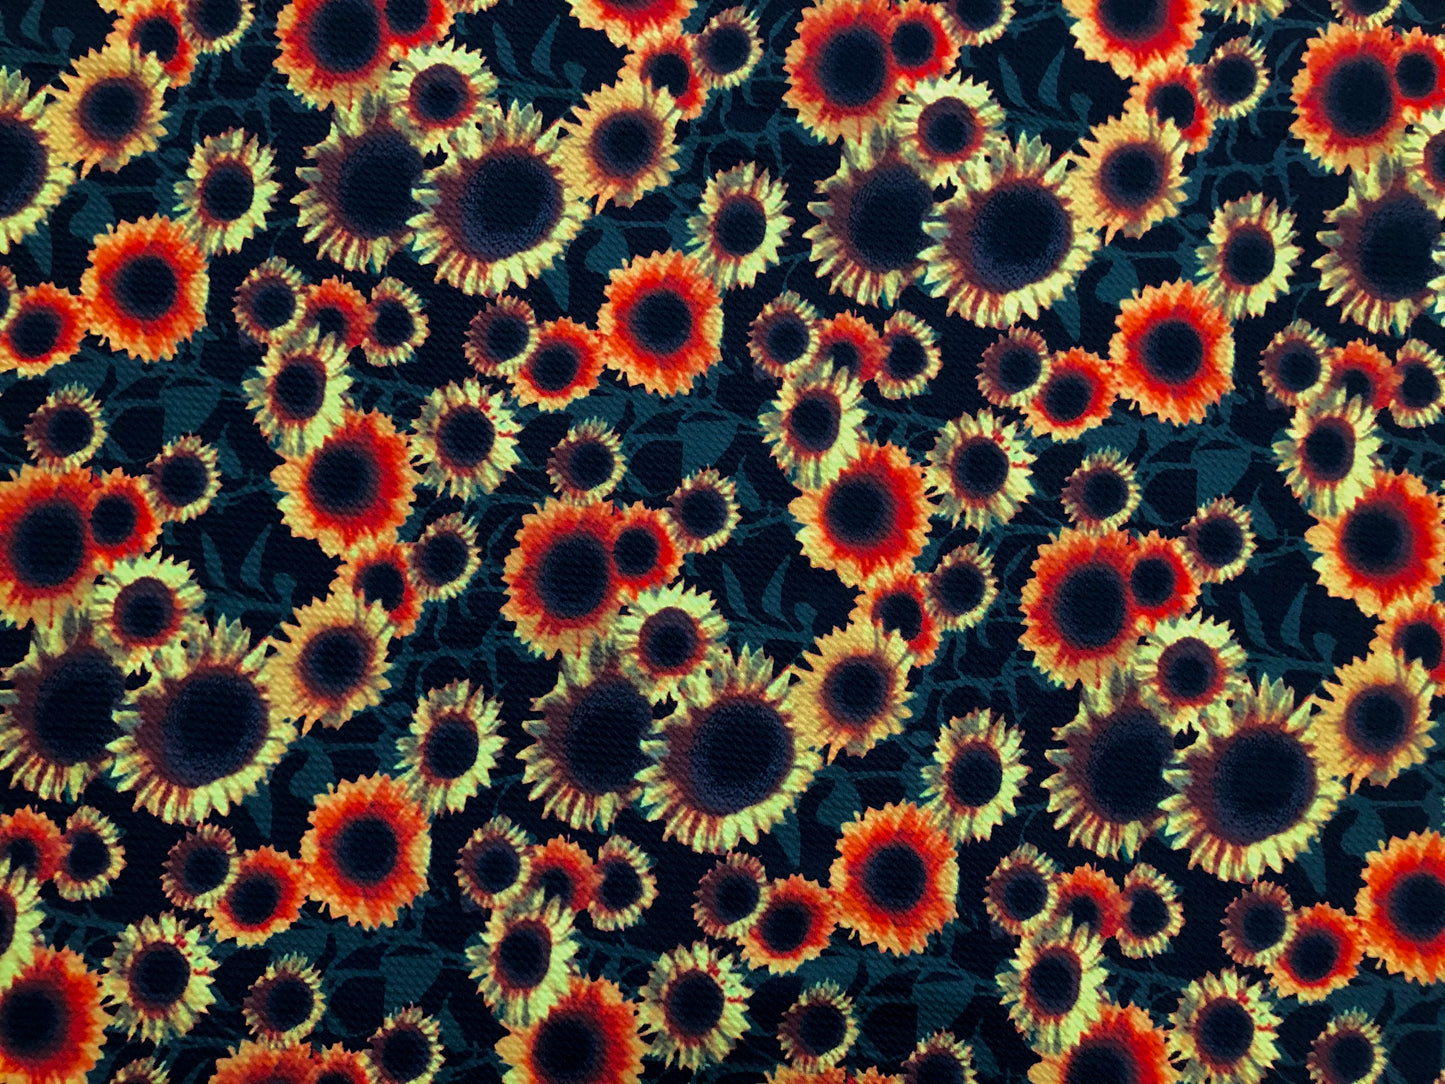 Bullet Knit Printed Fabric-Black Orange Yellow Sunflowers-BPR214-Sold by the Yard